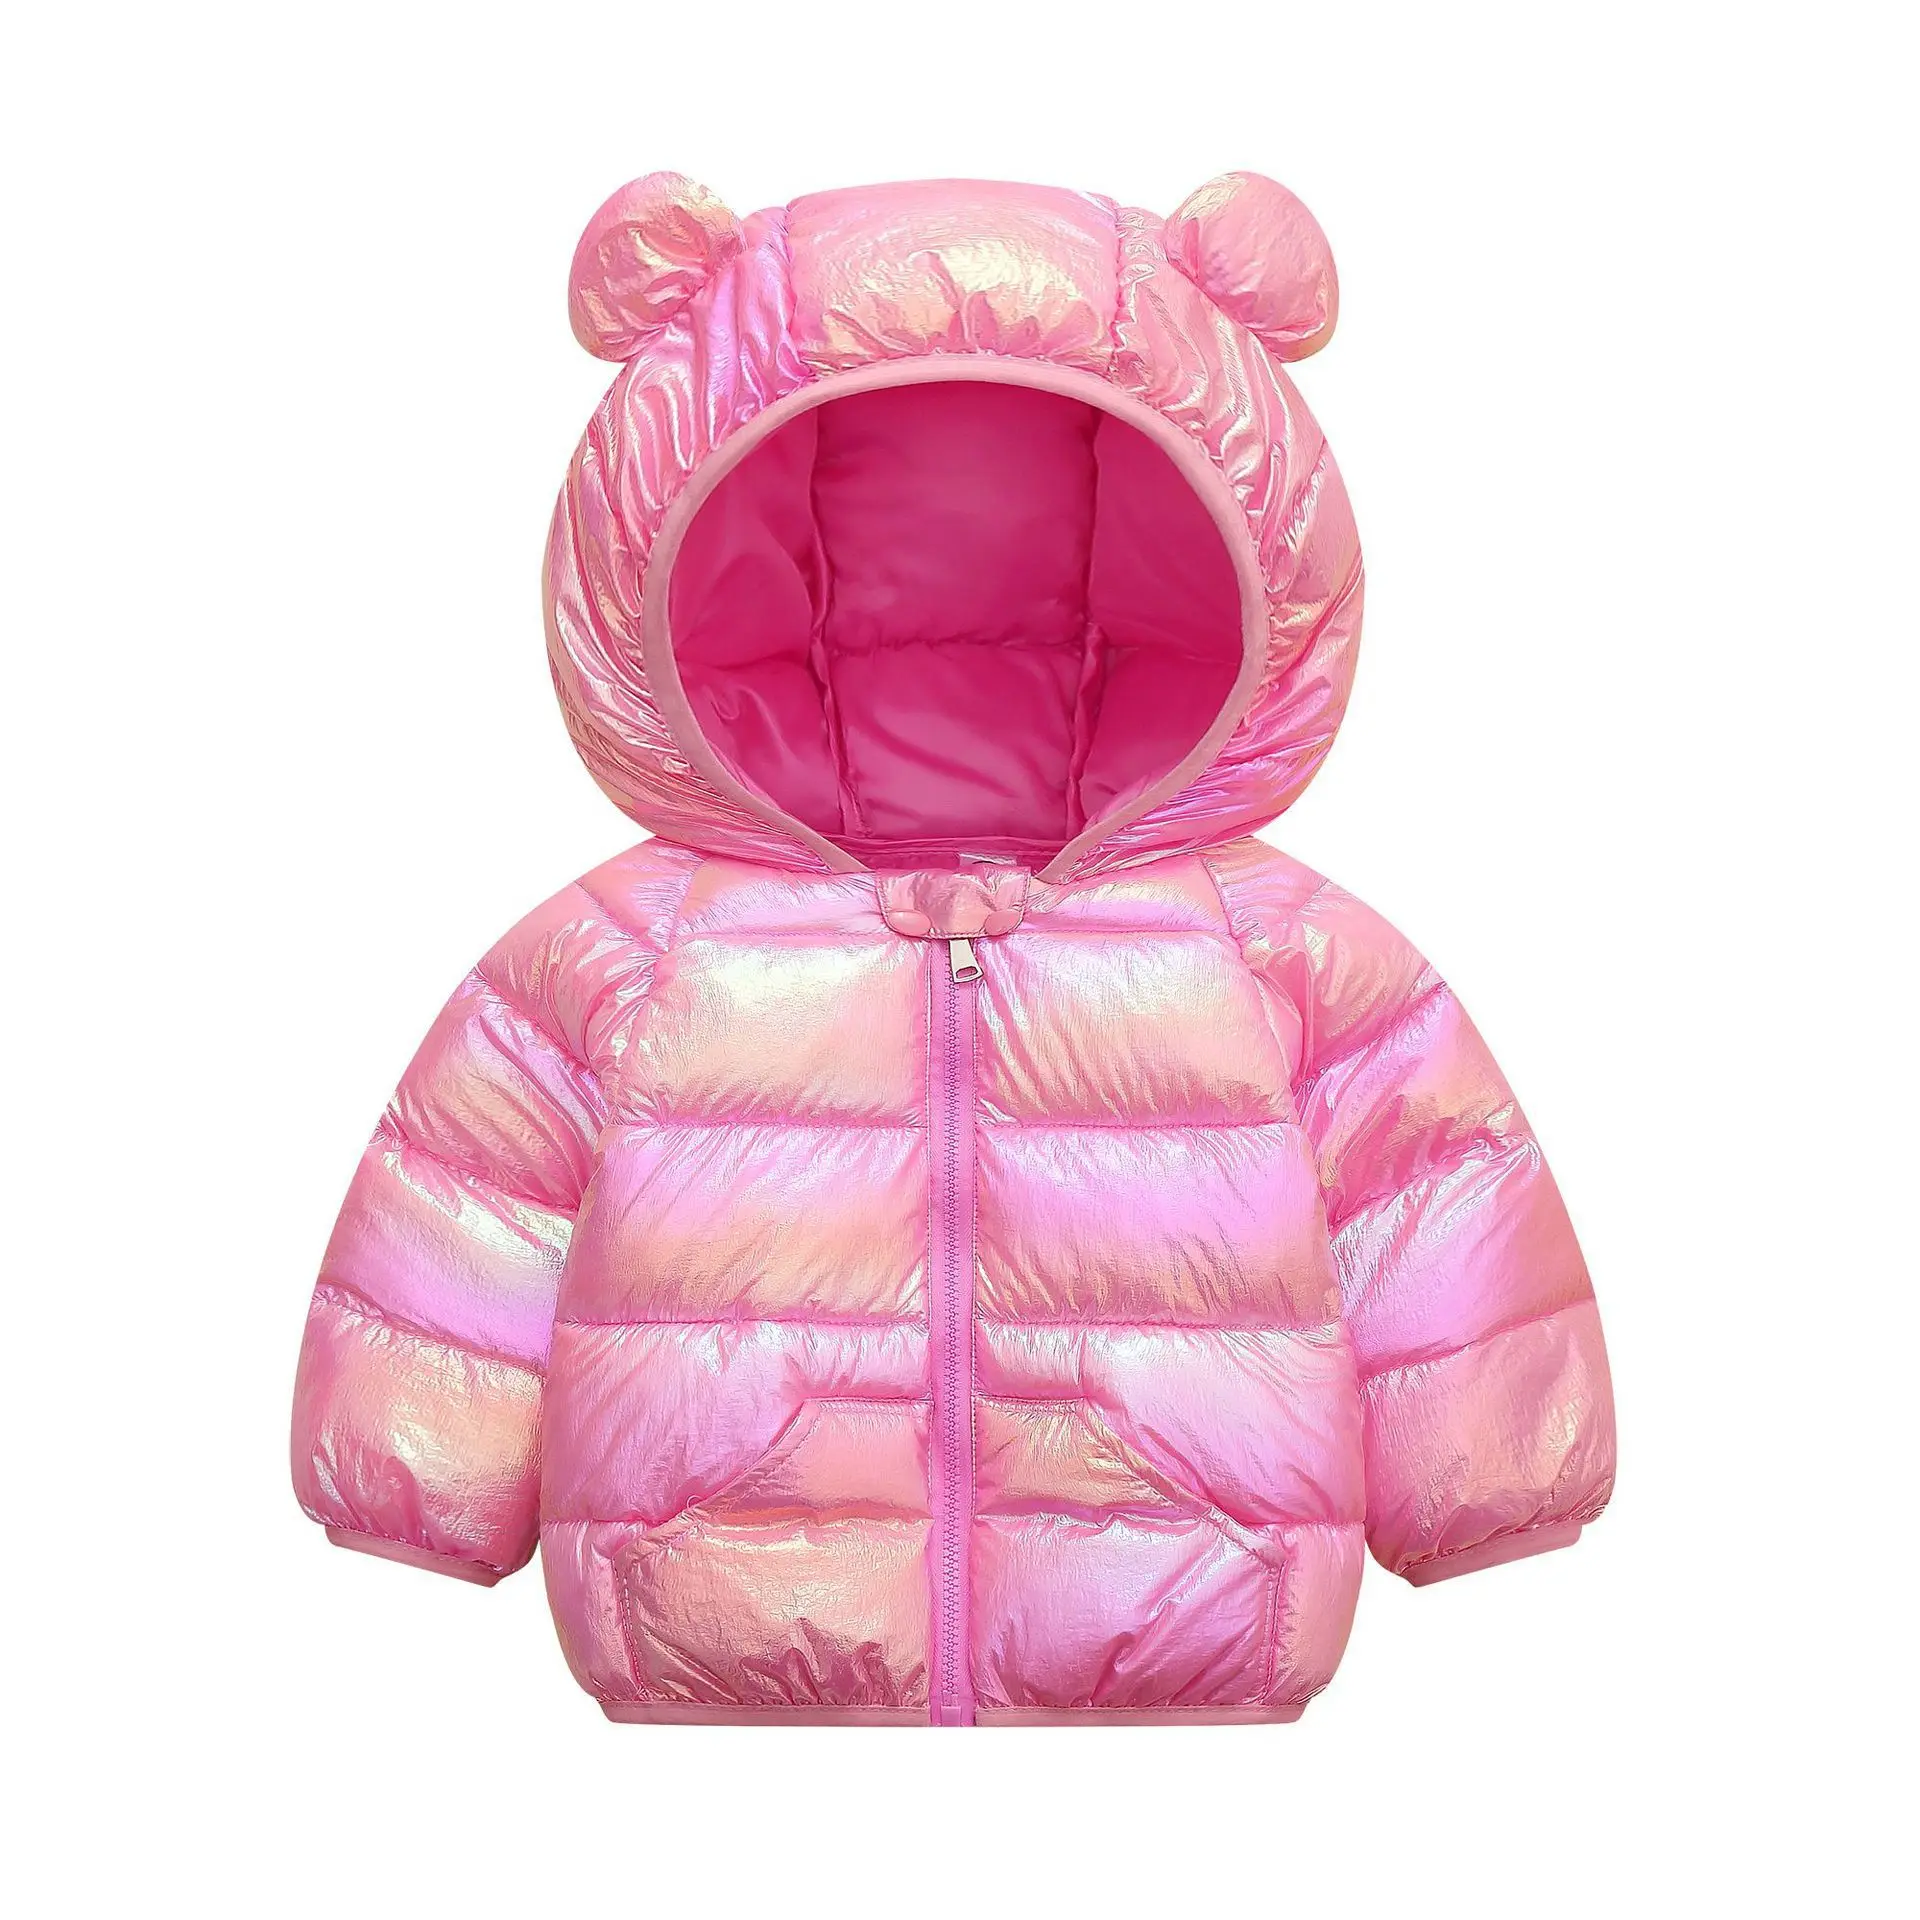 

ZWY1350 Girls Hooded Down Jackets Christmas Kids Coats Baby Character Warm Down Jacket Years Toddler Girl Jacket Outerwear